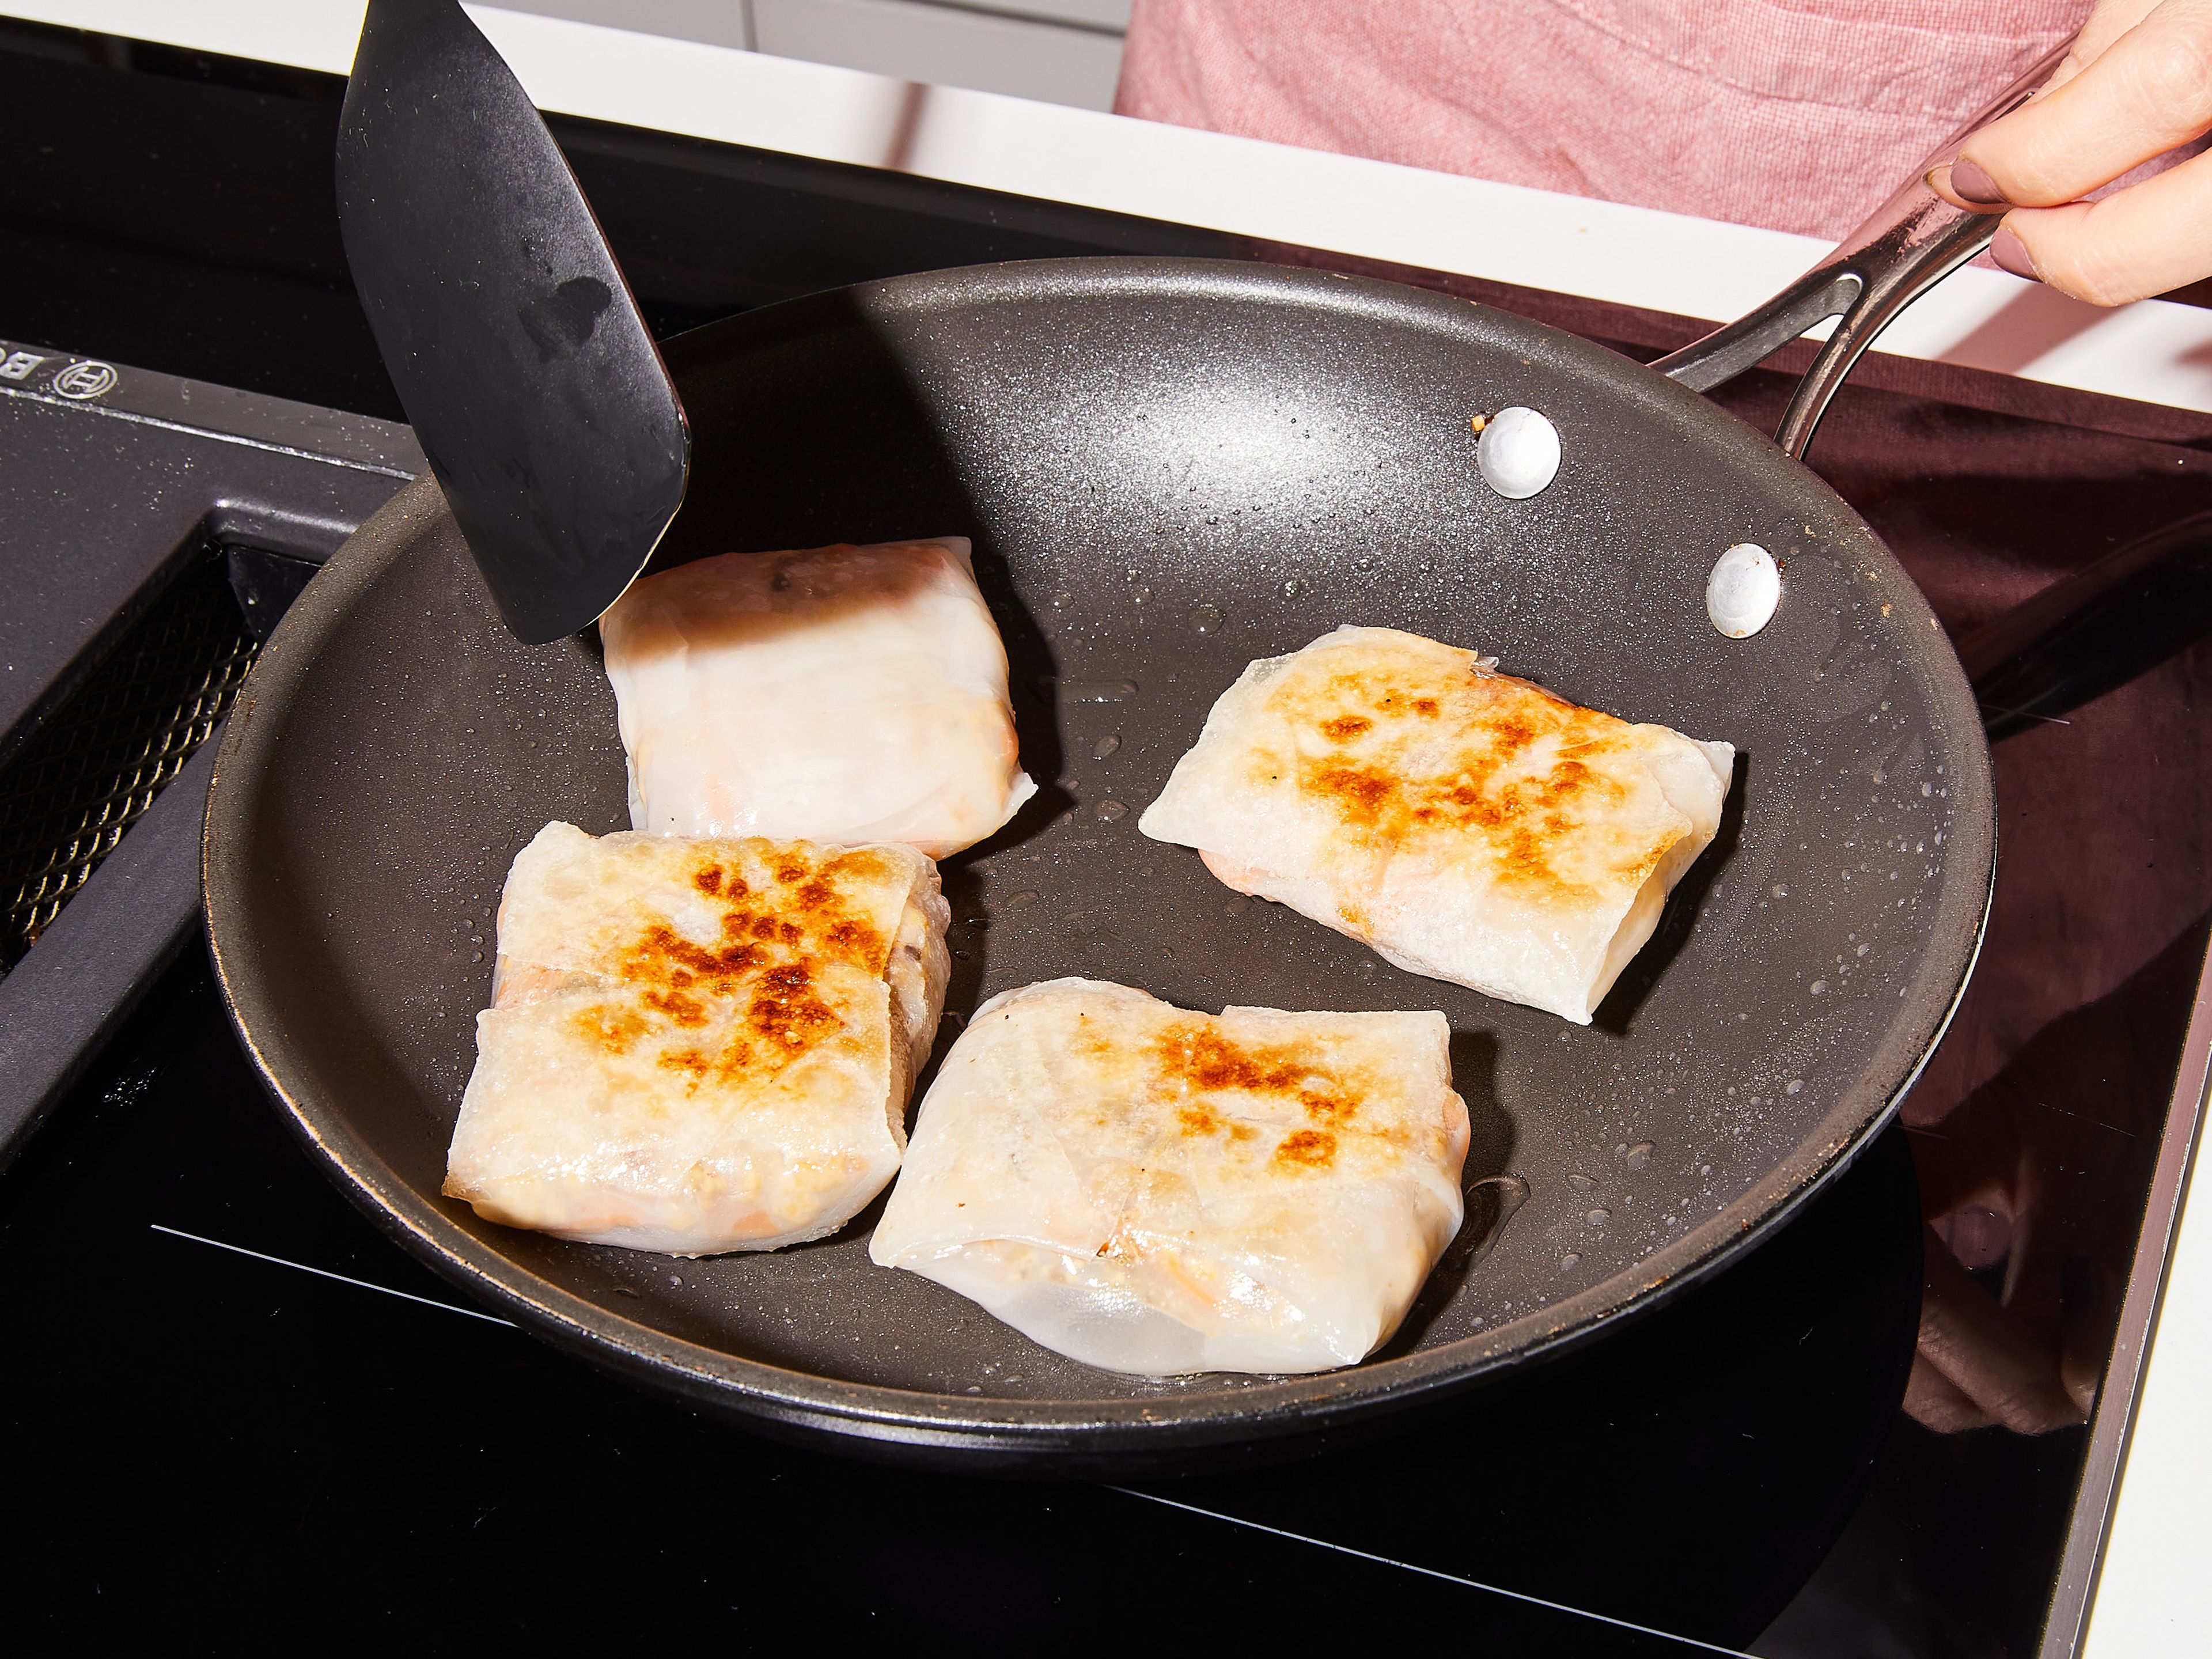 Add remaining toasted sesame oil to a frying pan and return to medium heat. Pan fry dumplings until crispy on both sides, approx. 8 min. Total. Serve immediately with chili crisp for dipping. Enjoy!